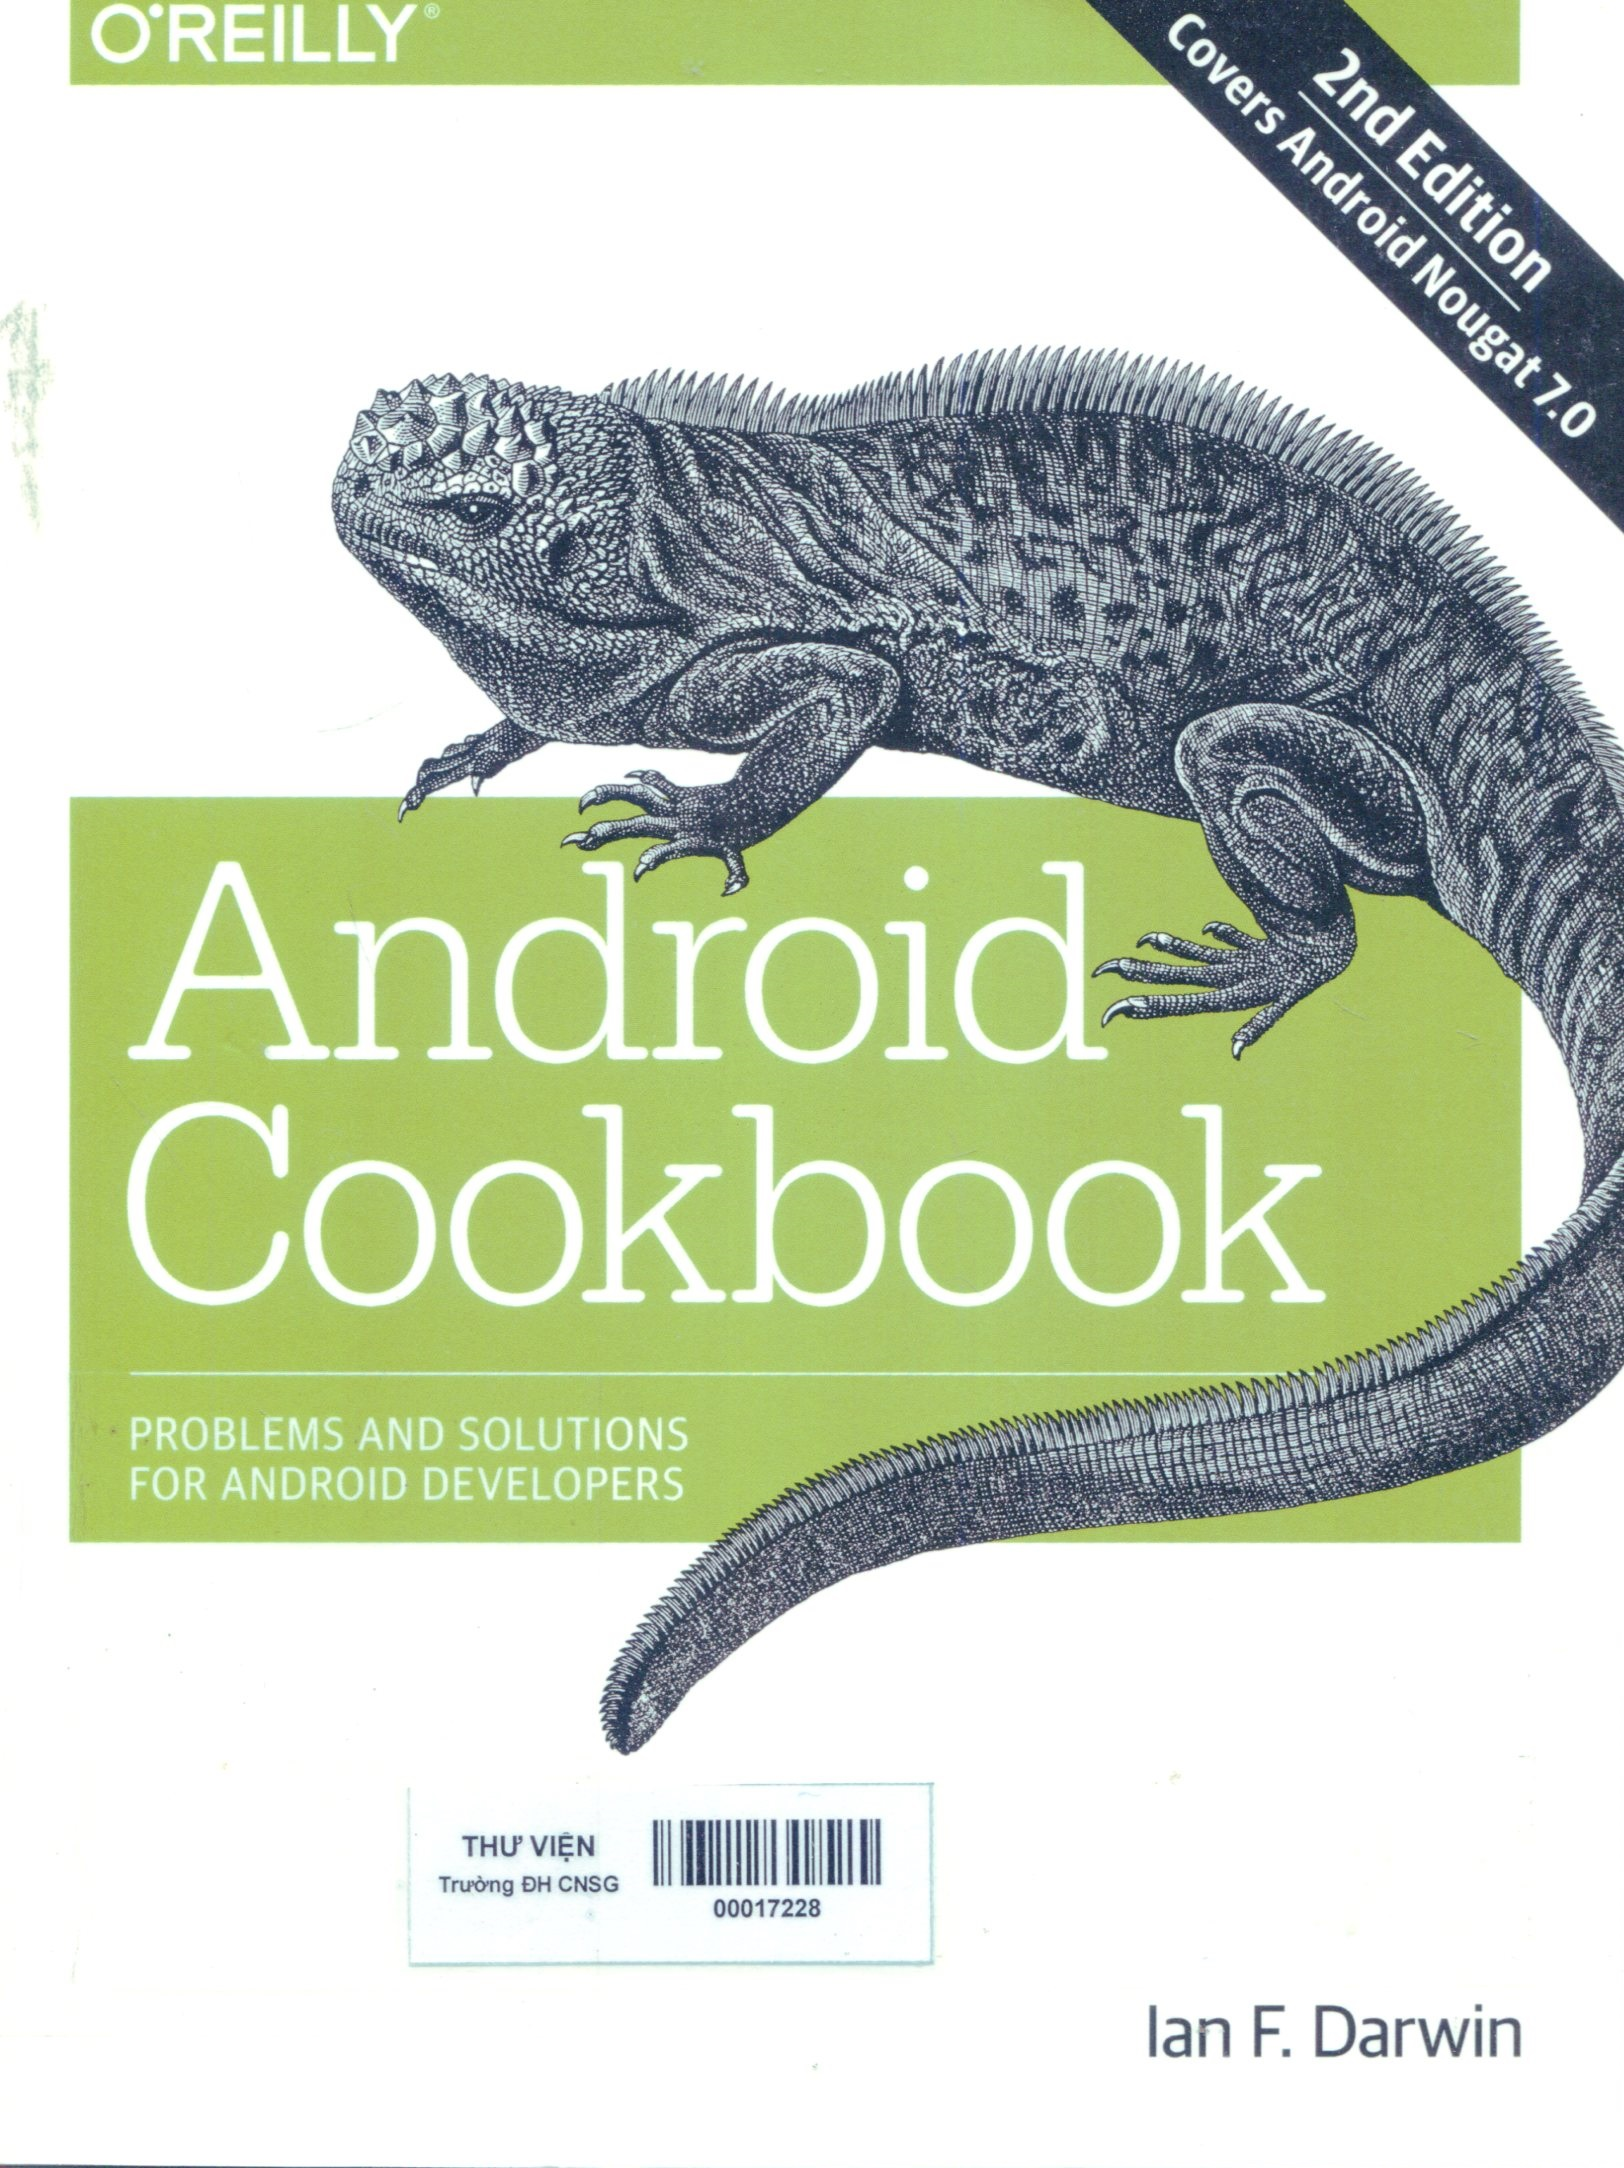 Android cookbook : problems and solutions for Android developers